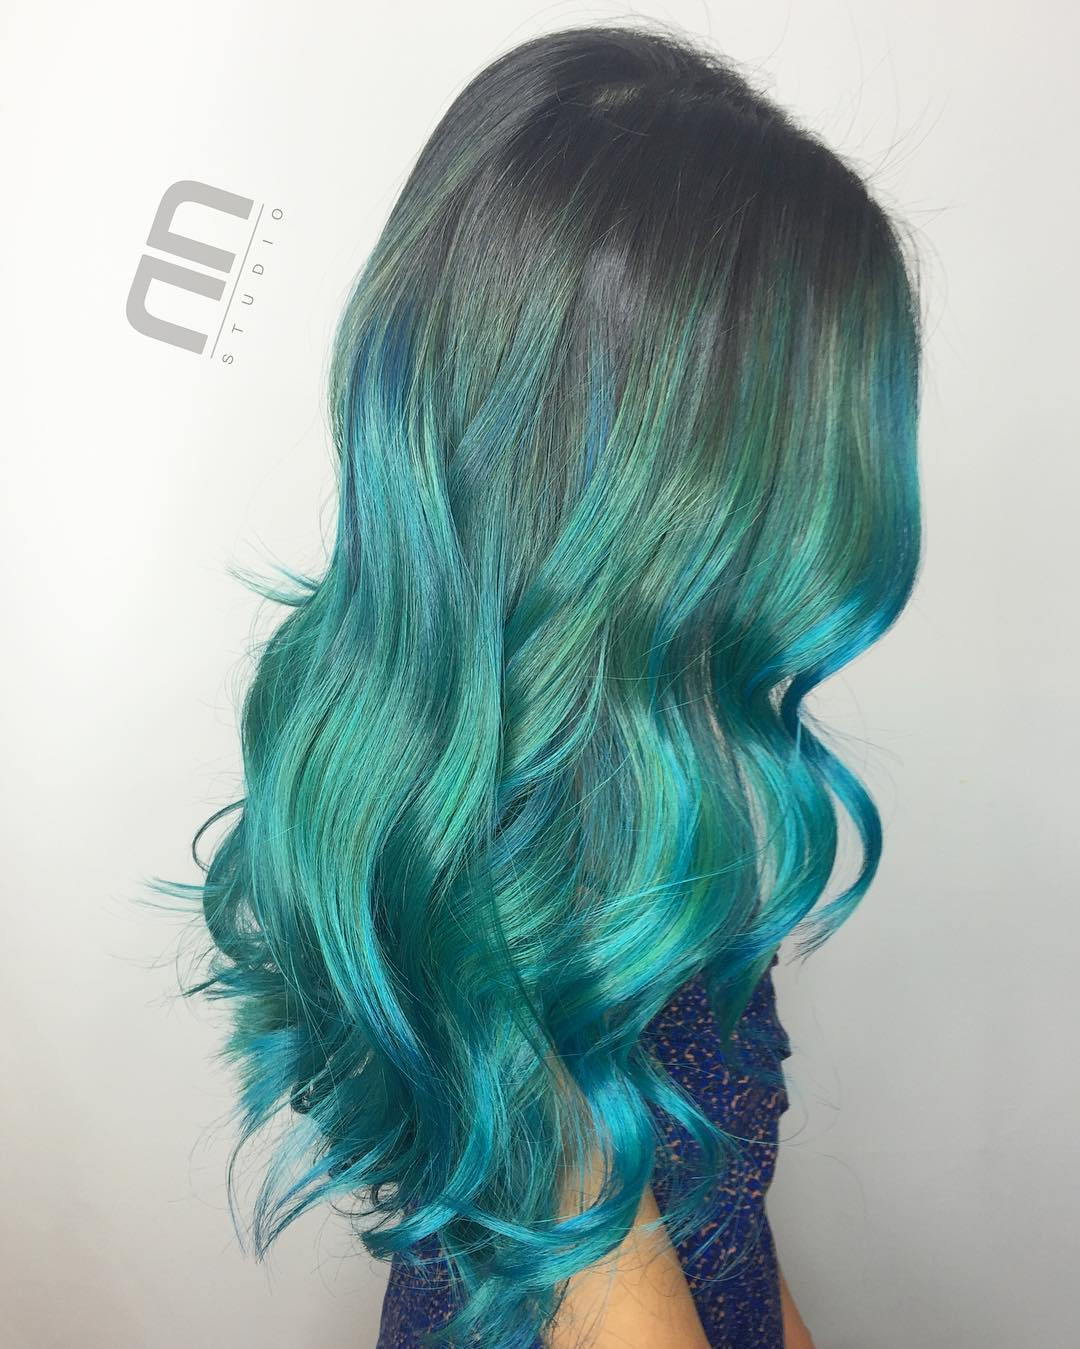 dlho Teal Ombre Hair